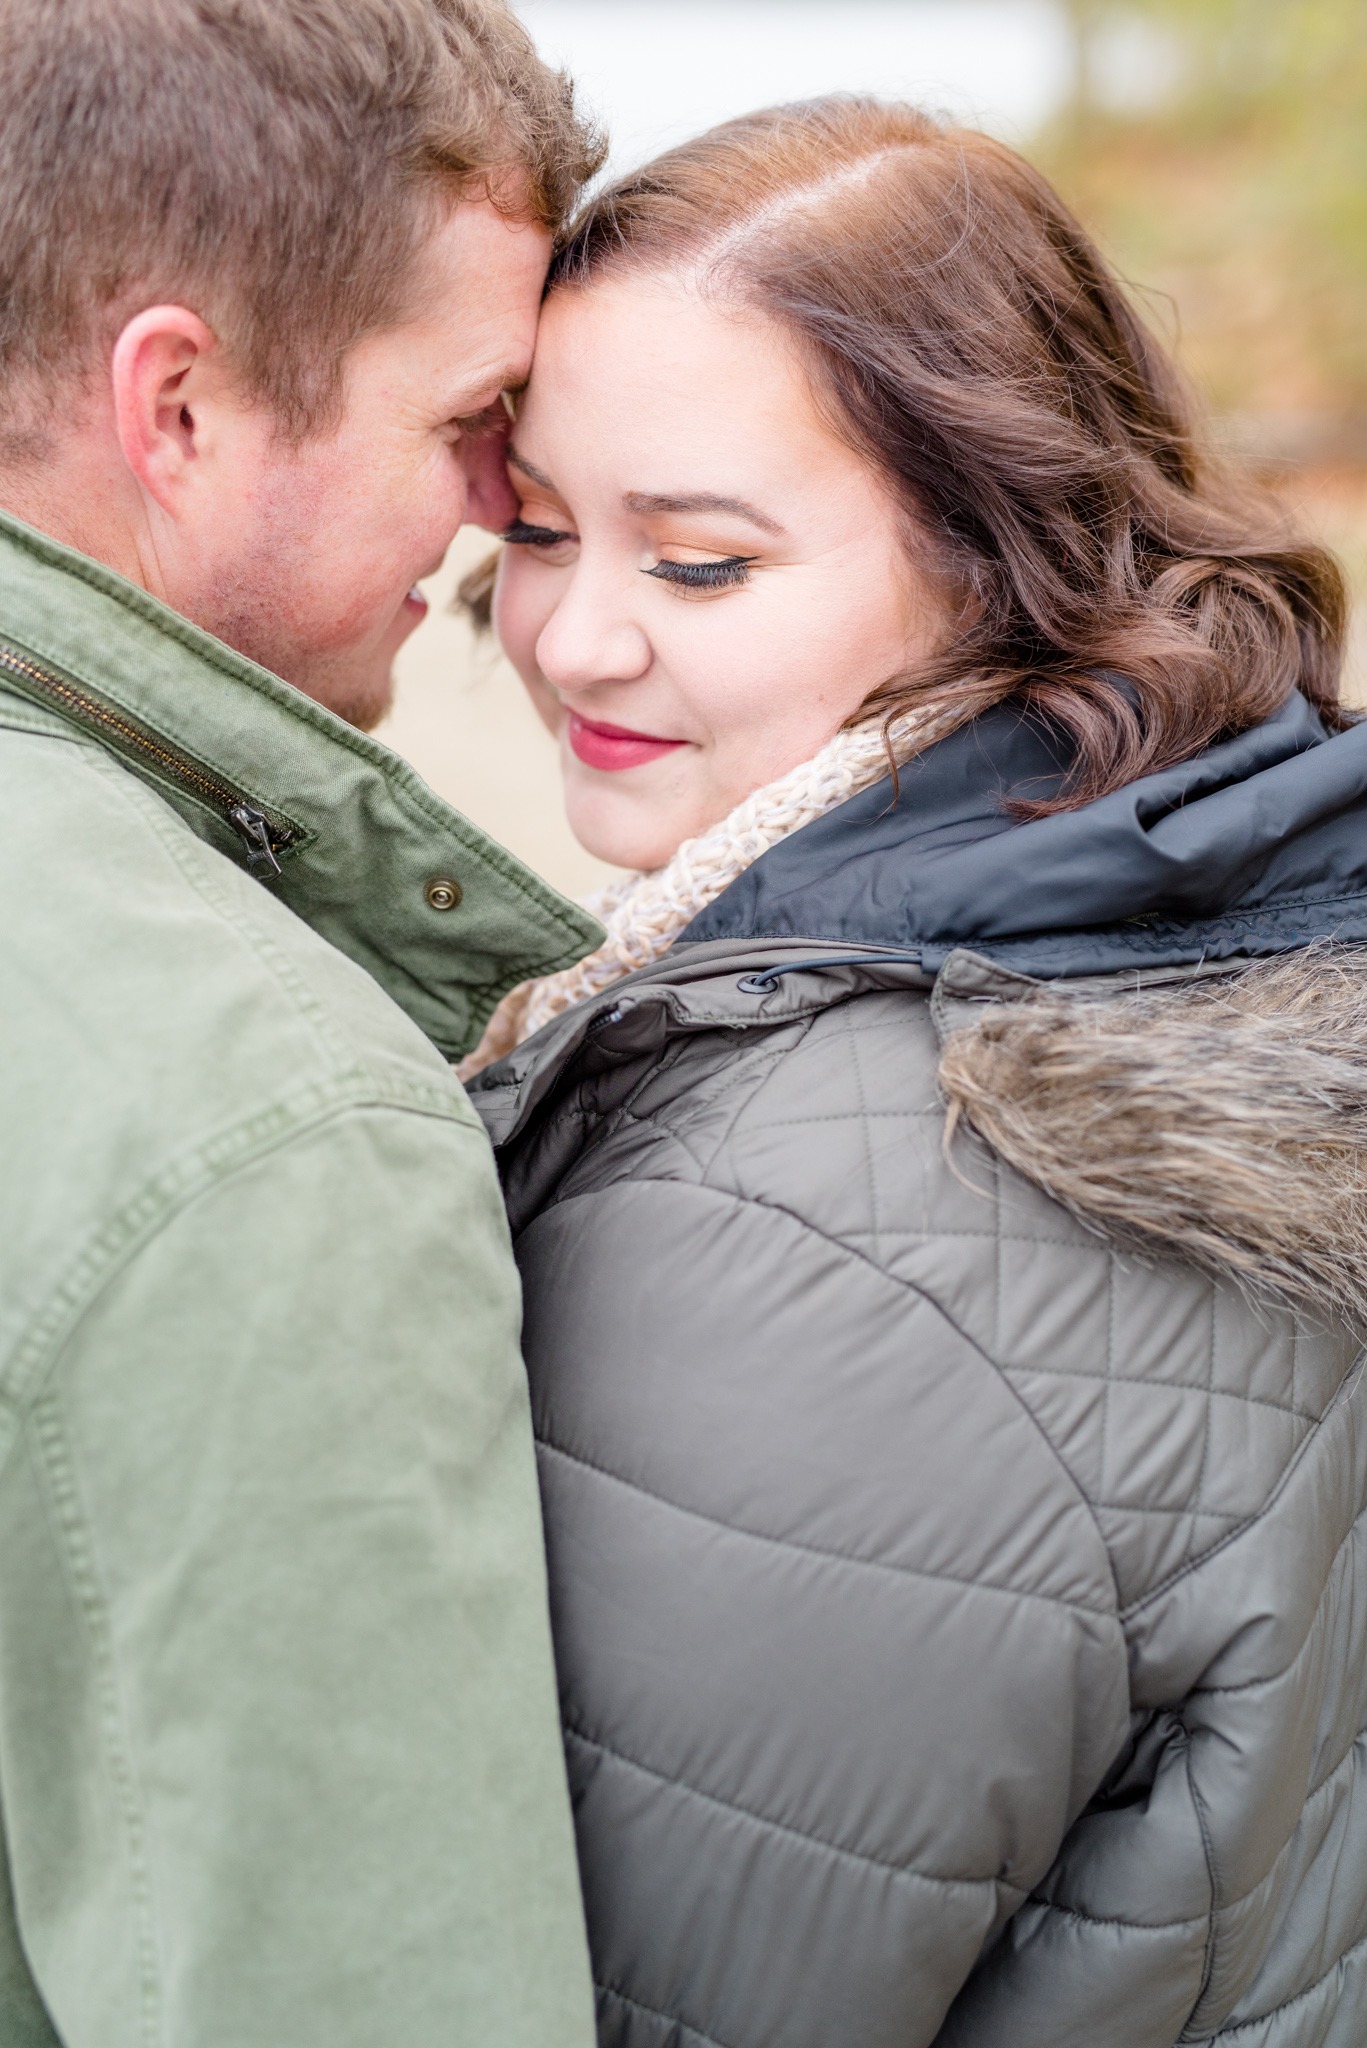 Bride and her fiance snuggle during engagement session.